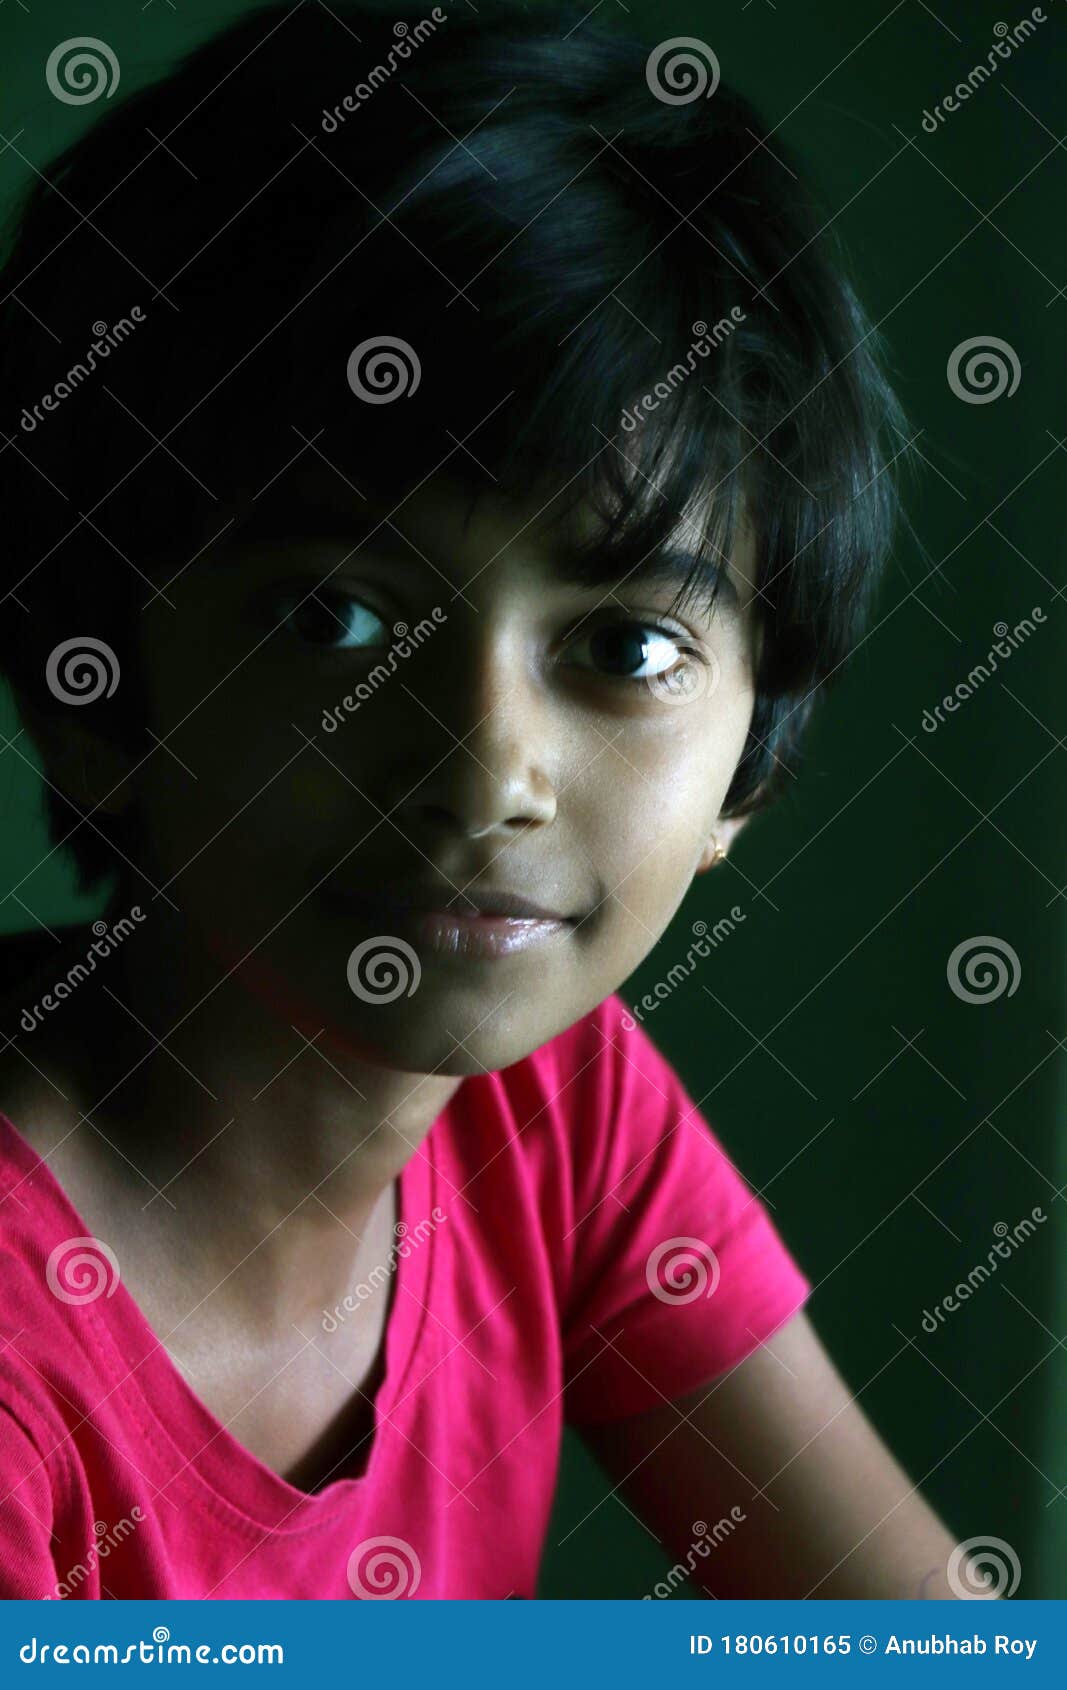 Portrait of an Indian Little Girl with Short Hair. Beautiful Eye of a Child  on Black Background Stock Image - Image of eyes, asian: 180610165